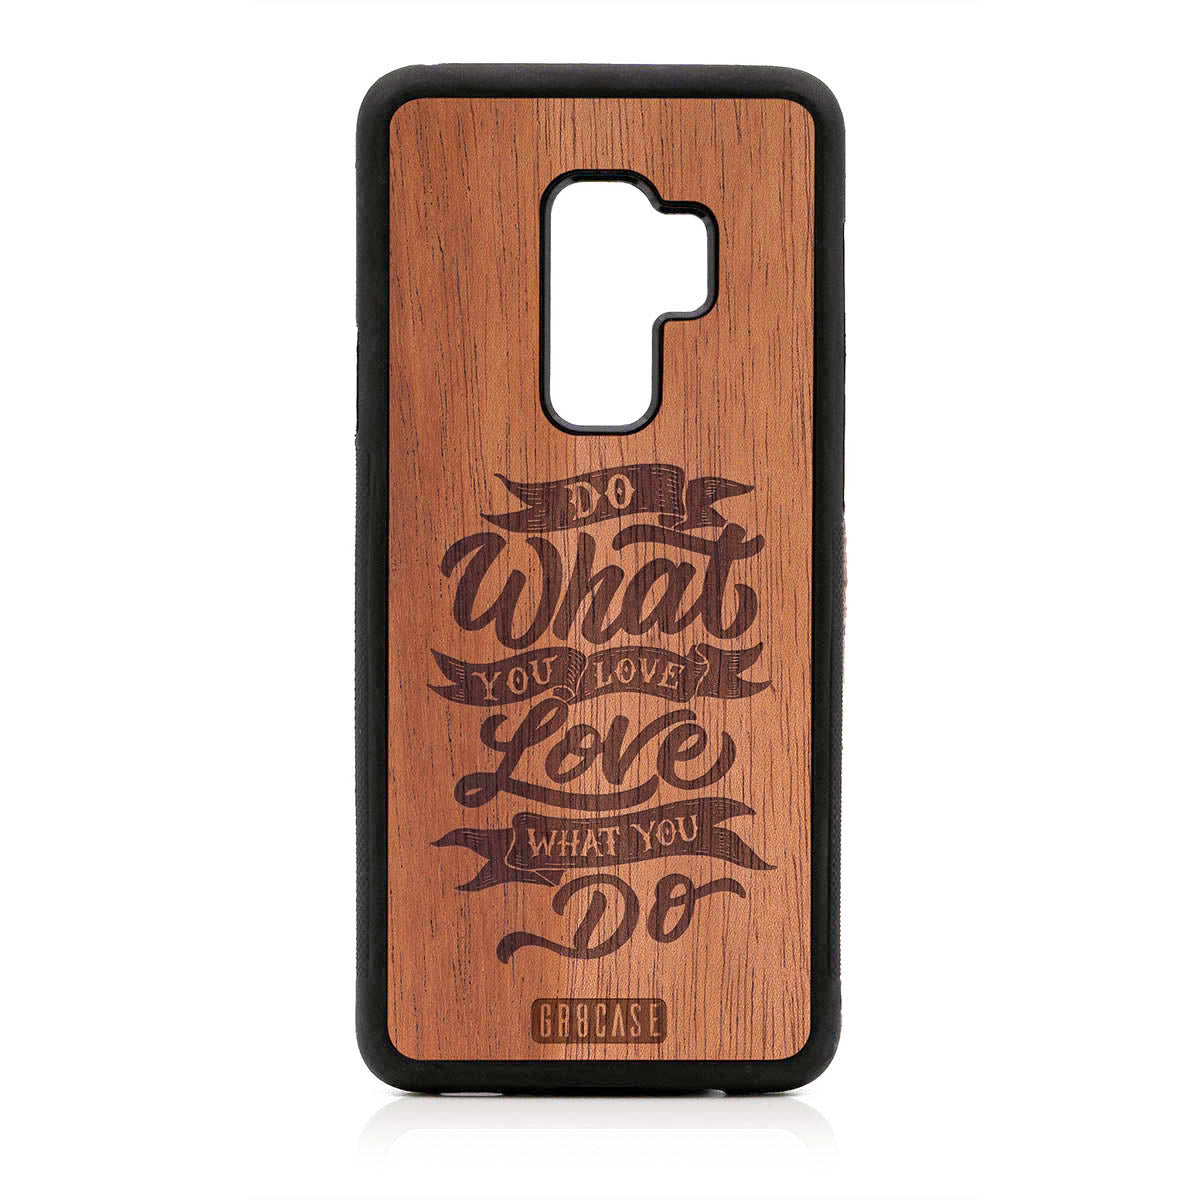 Do What You Love Love What You Do Design Wood Case For Samsung Galaxy S9 Plus by GR8CASE